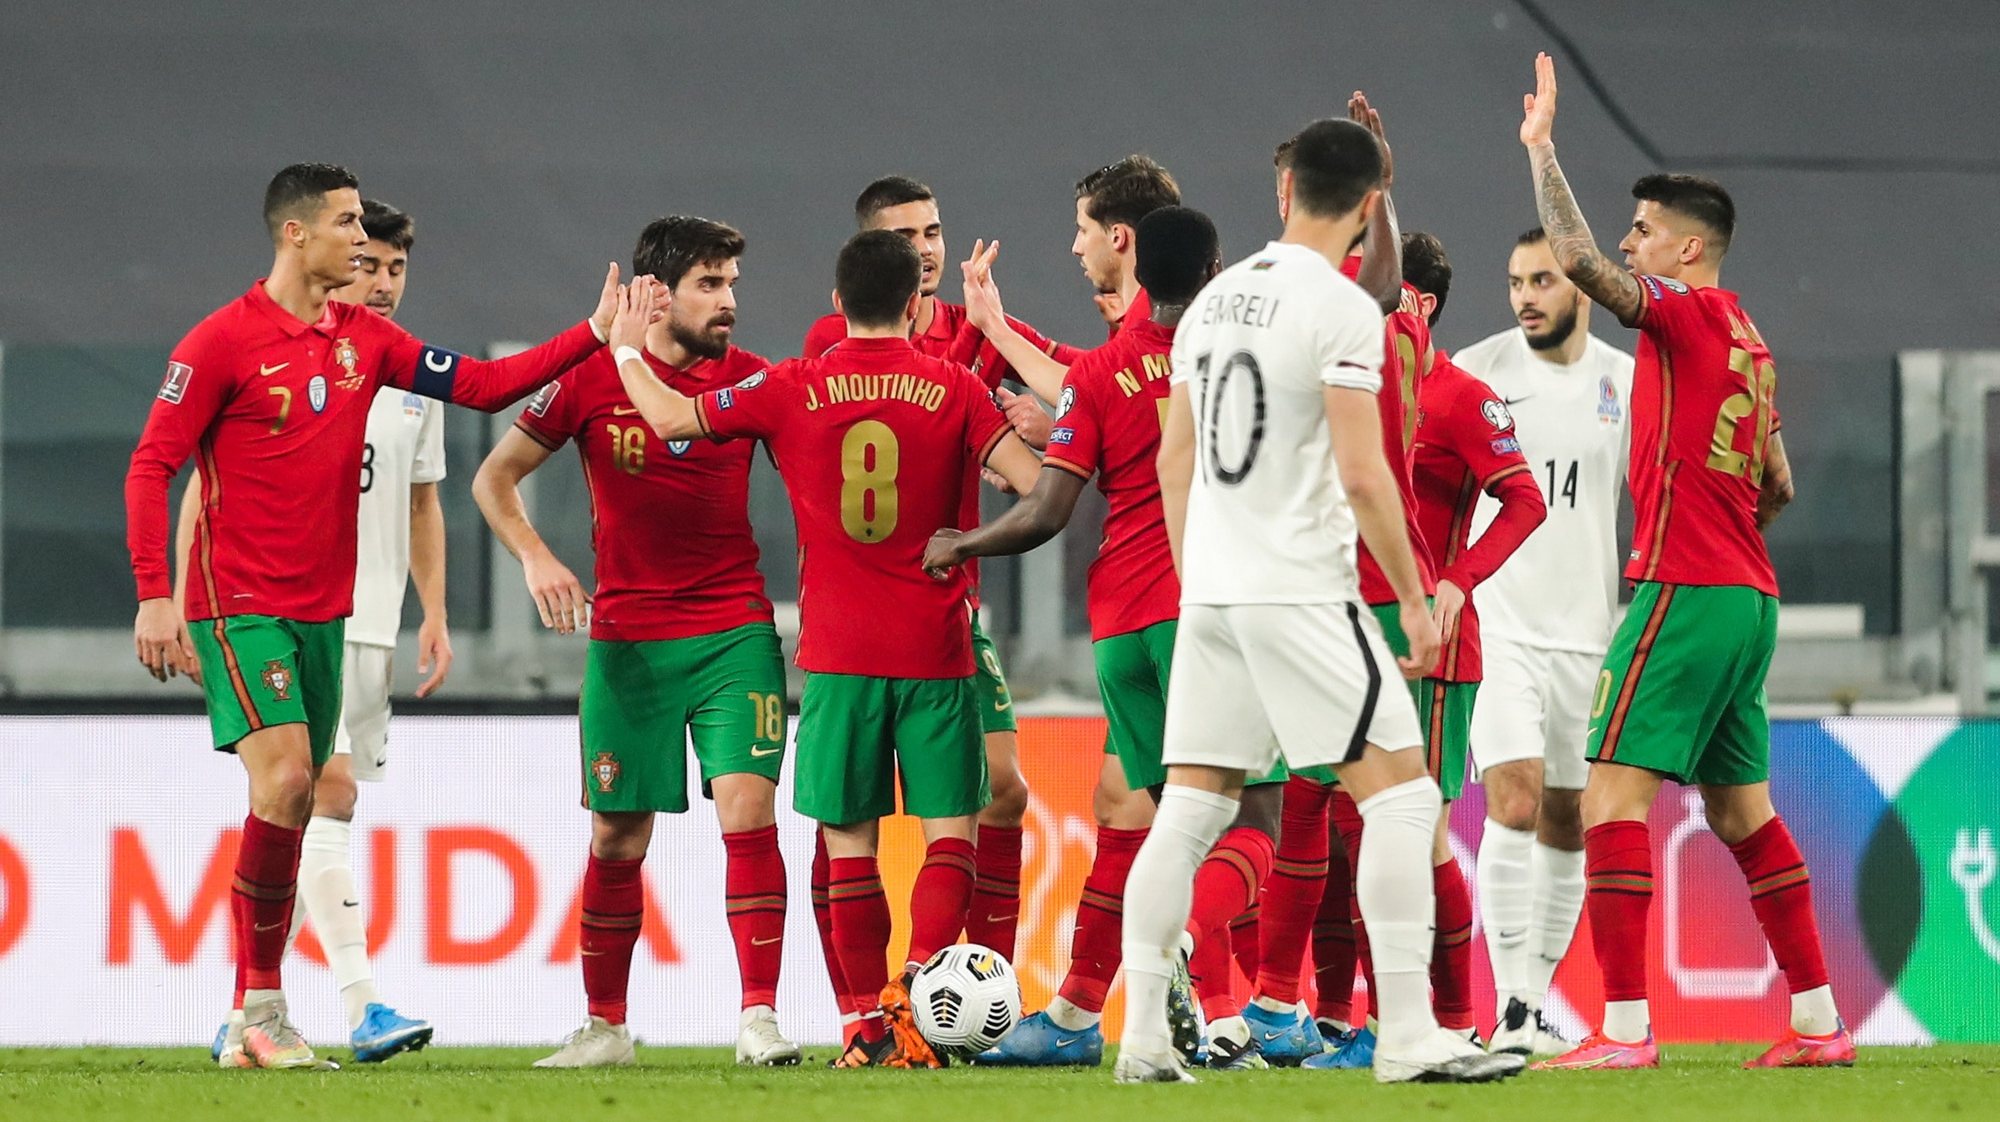 epa09094785 Portugal soccer players celebrate after Maskim Medvedev of Azerbaijan scored an own-goal during the FIFA World Cup Qatar 2022 Group A qualifier match Portugal against Azerbaijan in Turin, Italy, 24 March 2021.  EPA/MIGUEL A. LOPES